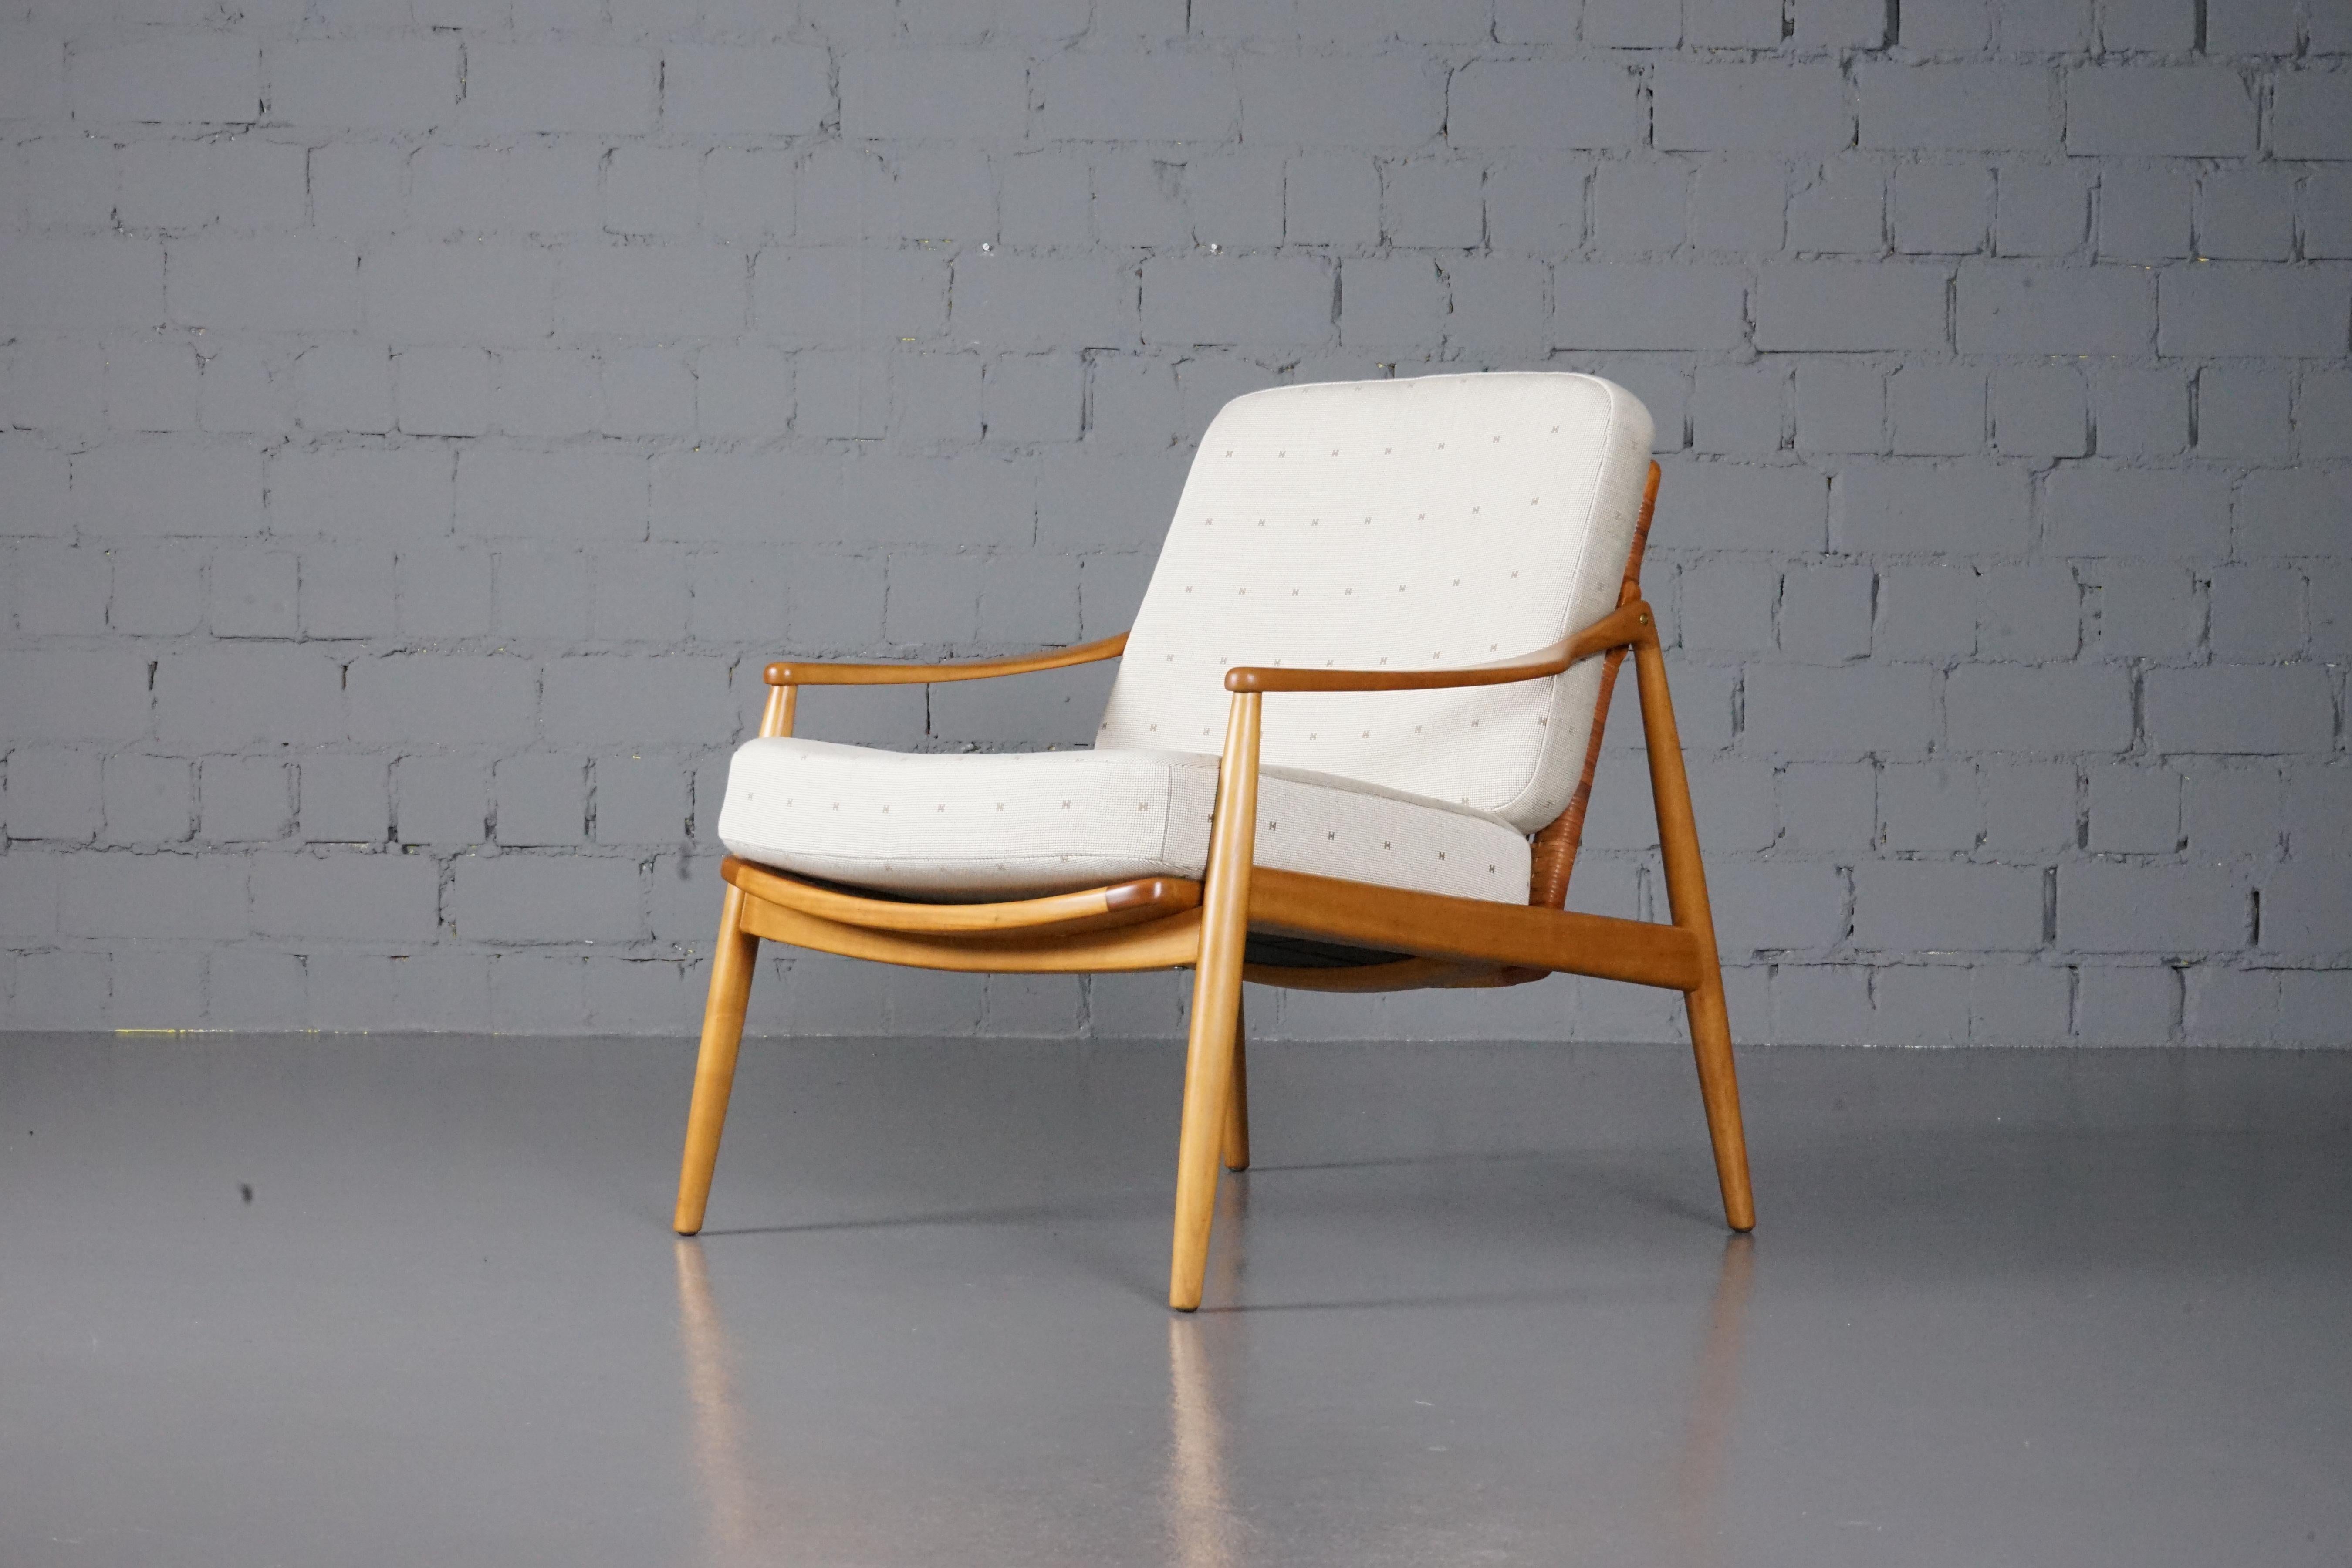 German mid-century lounge armchair Type 400 by Hartmut Lohmeyer for Wilkhahn, designed around 1956. Production period 1956 to 1966.

New upholstery with high quality fabric by Hermes Paris/ Dedar, Milano. 
Semis De H col.M01 écru. Like the links